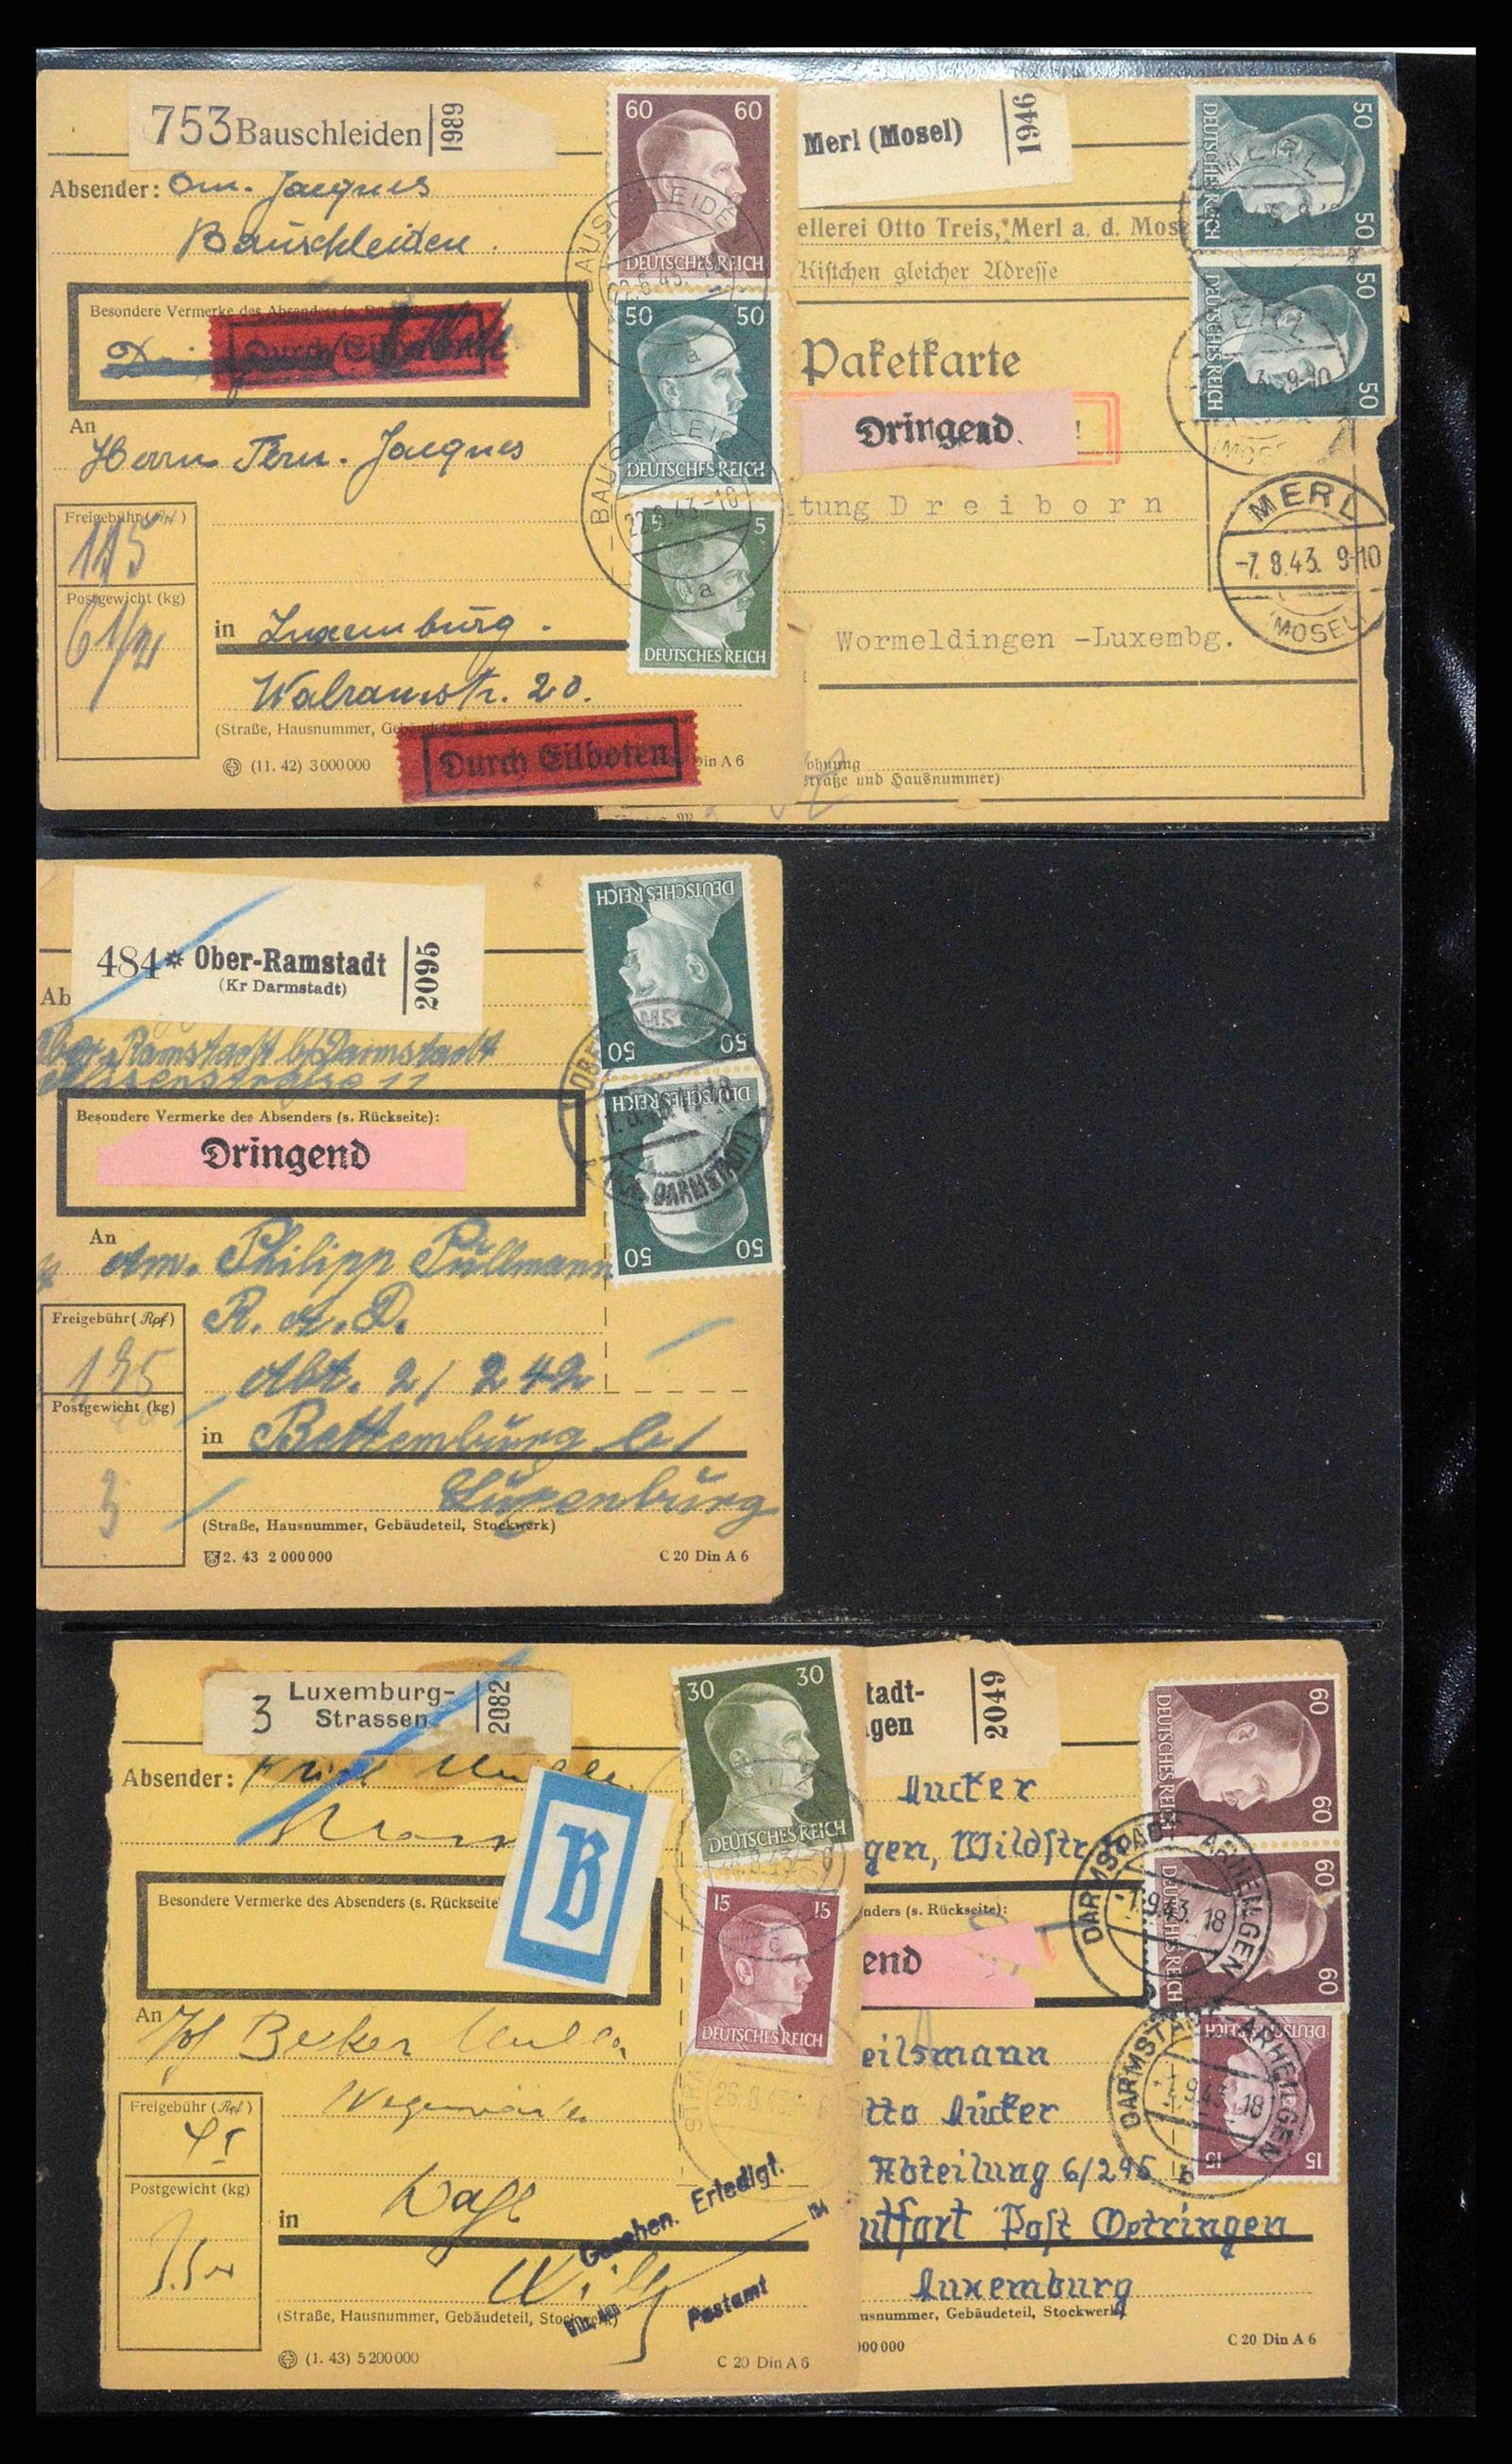 38646 0118 - Stamp collection 38646 Germany covers and cards 1940-1945.